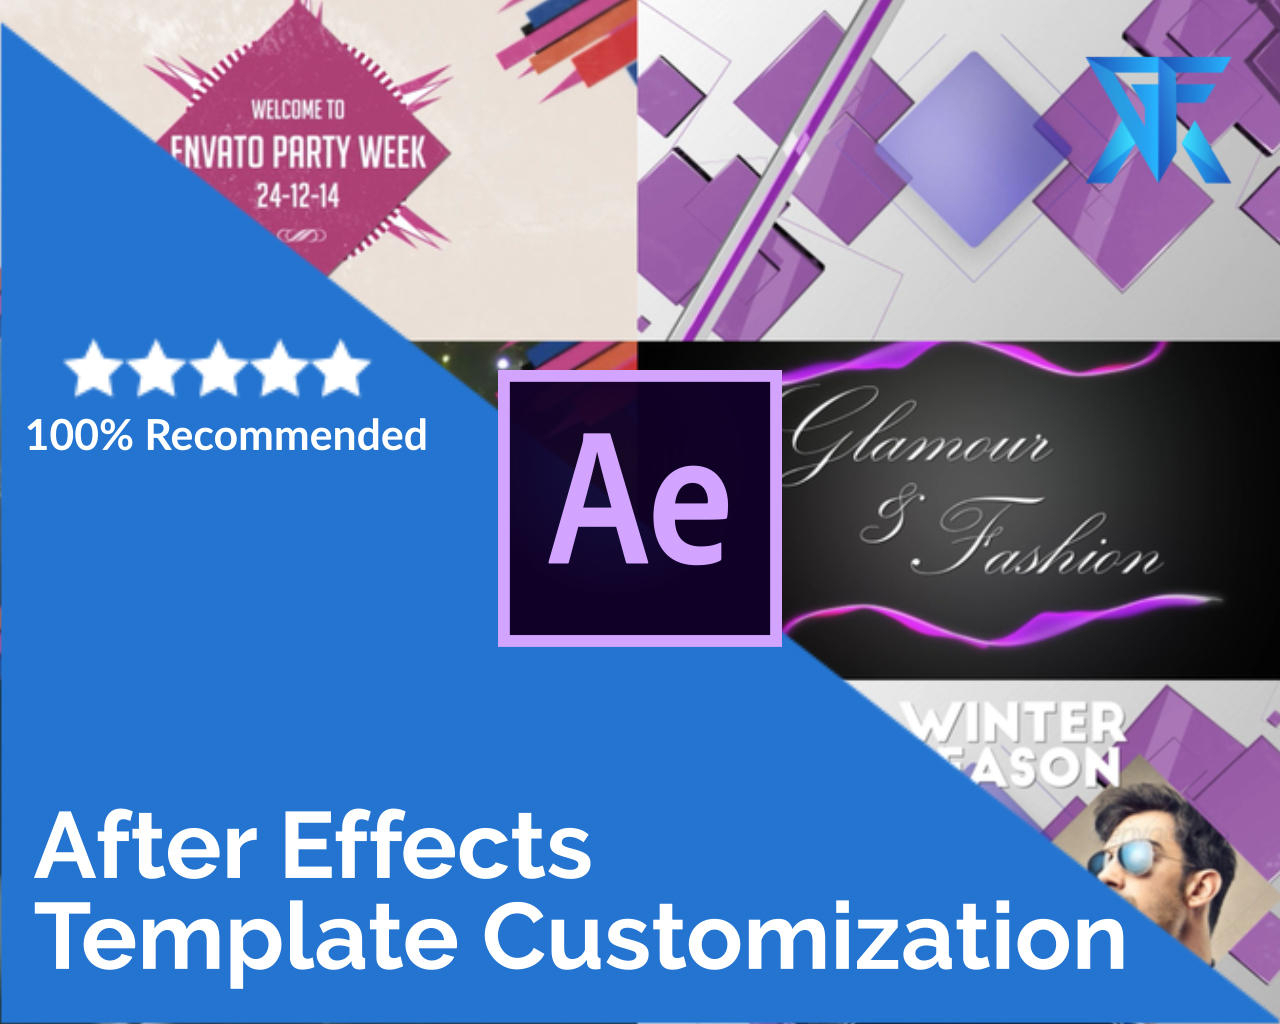 envato after effects templates download